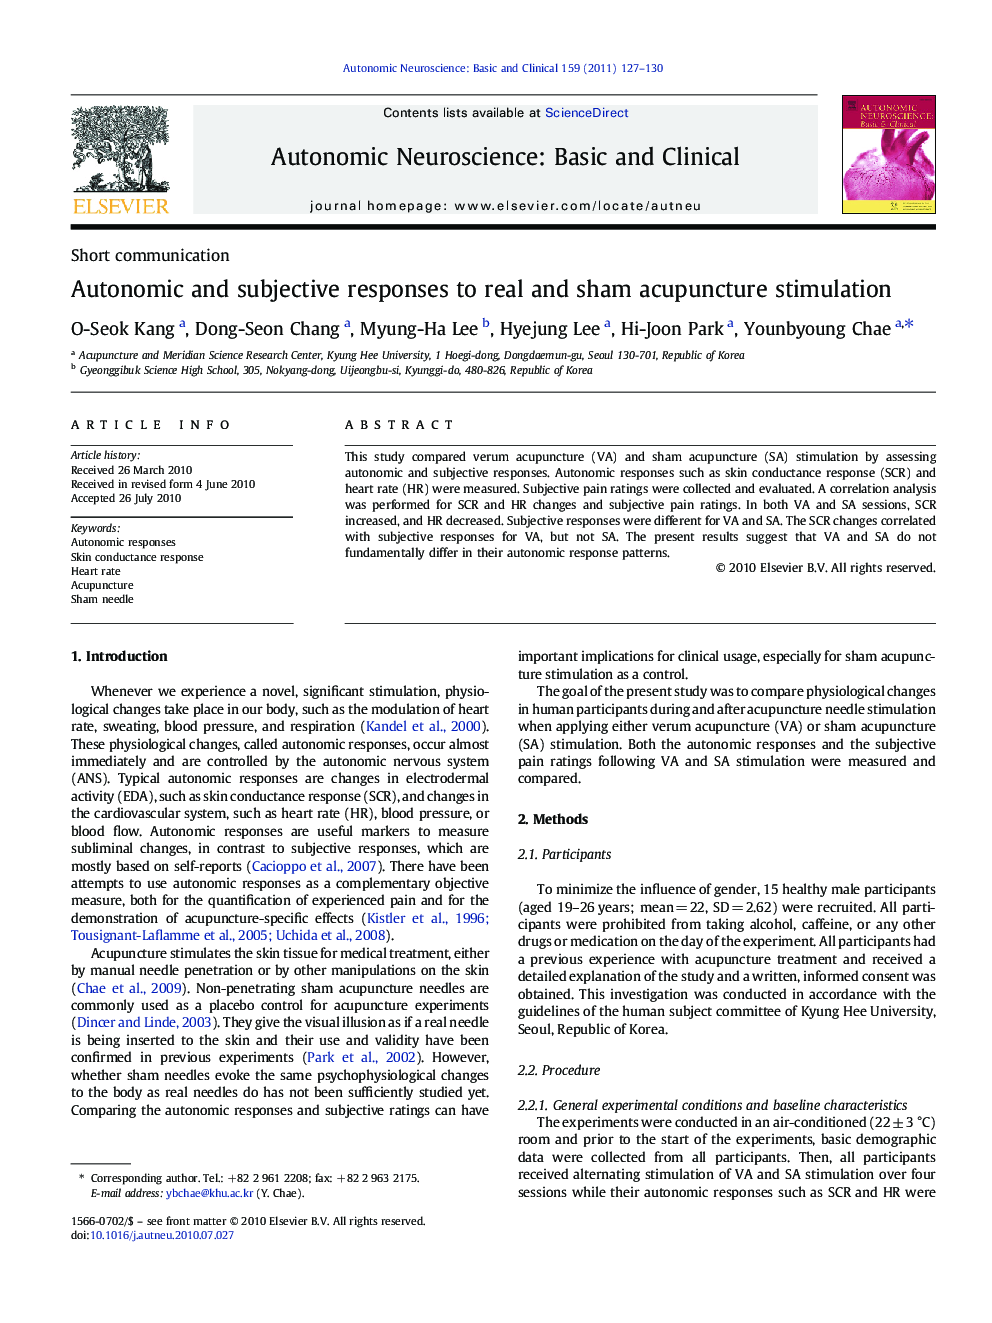 Autonomic and subjective responses to real and sham acupuncture stimulation